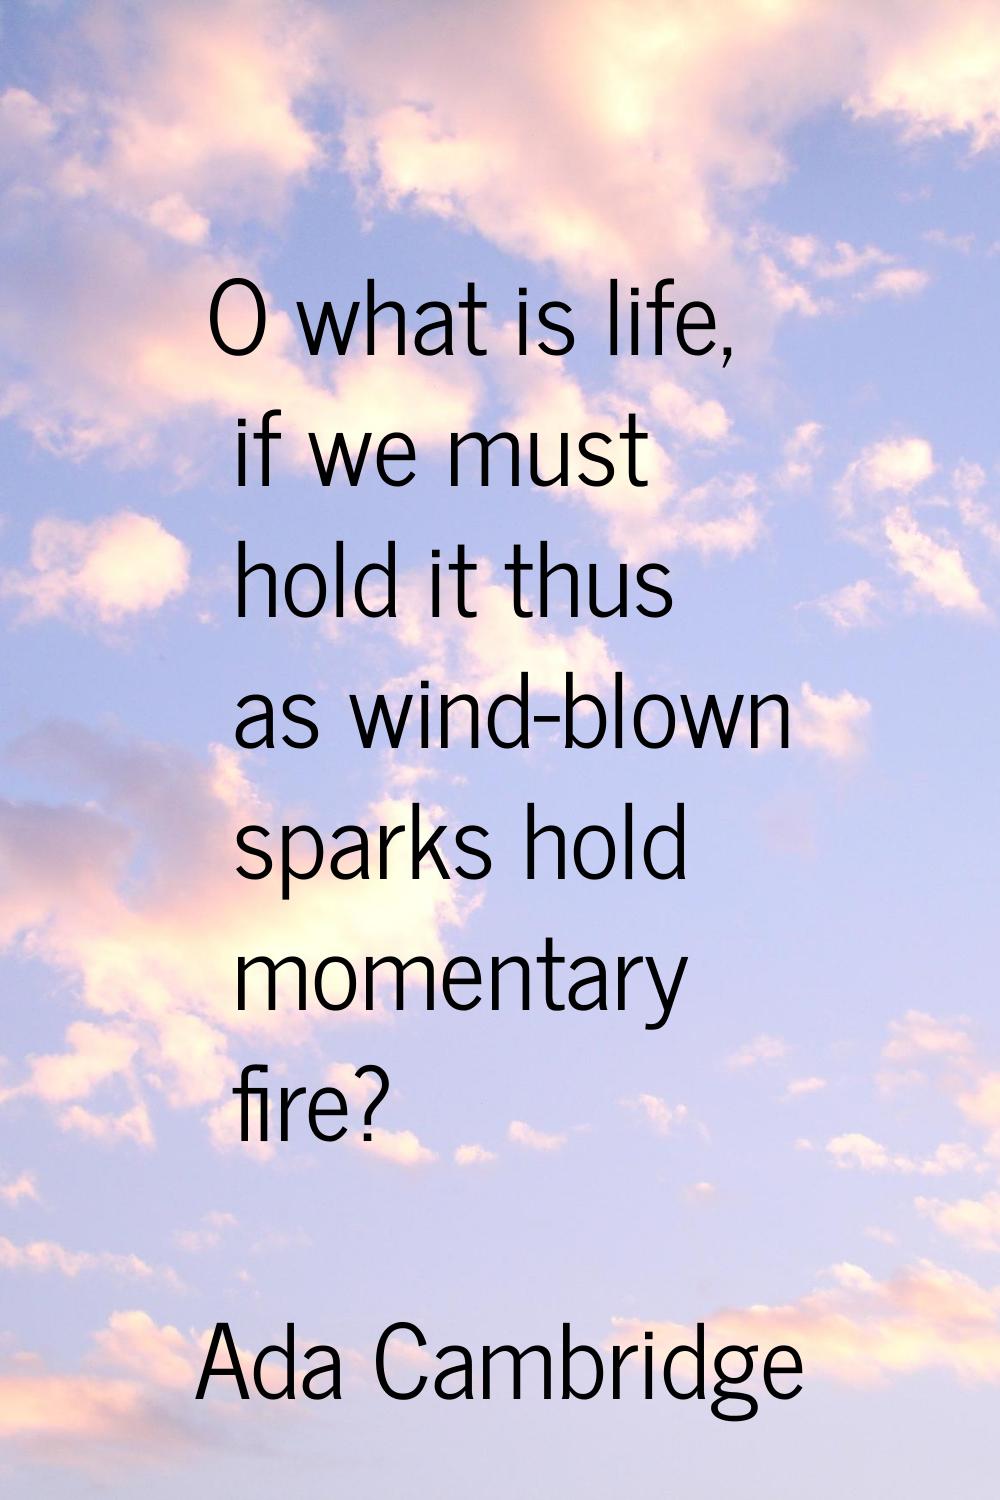 O what is life, if we must hold it thus as wind-blown sparks hold momentary fire?